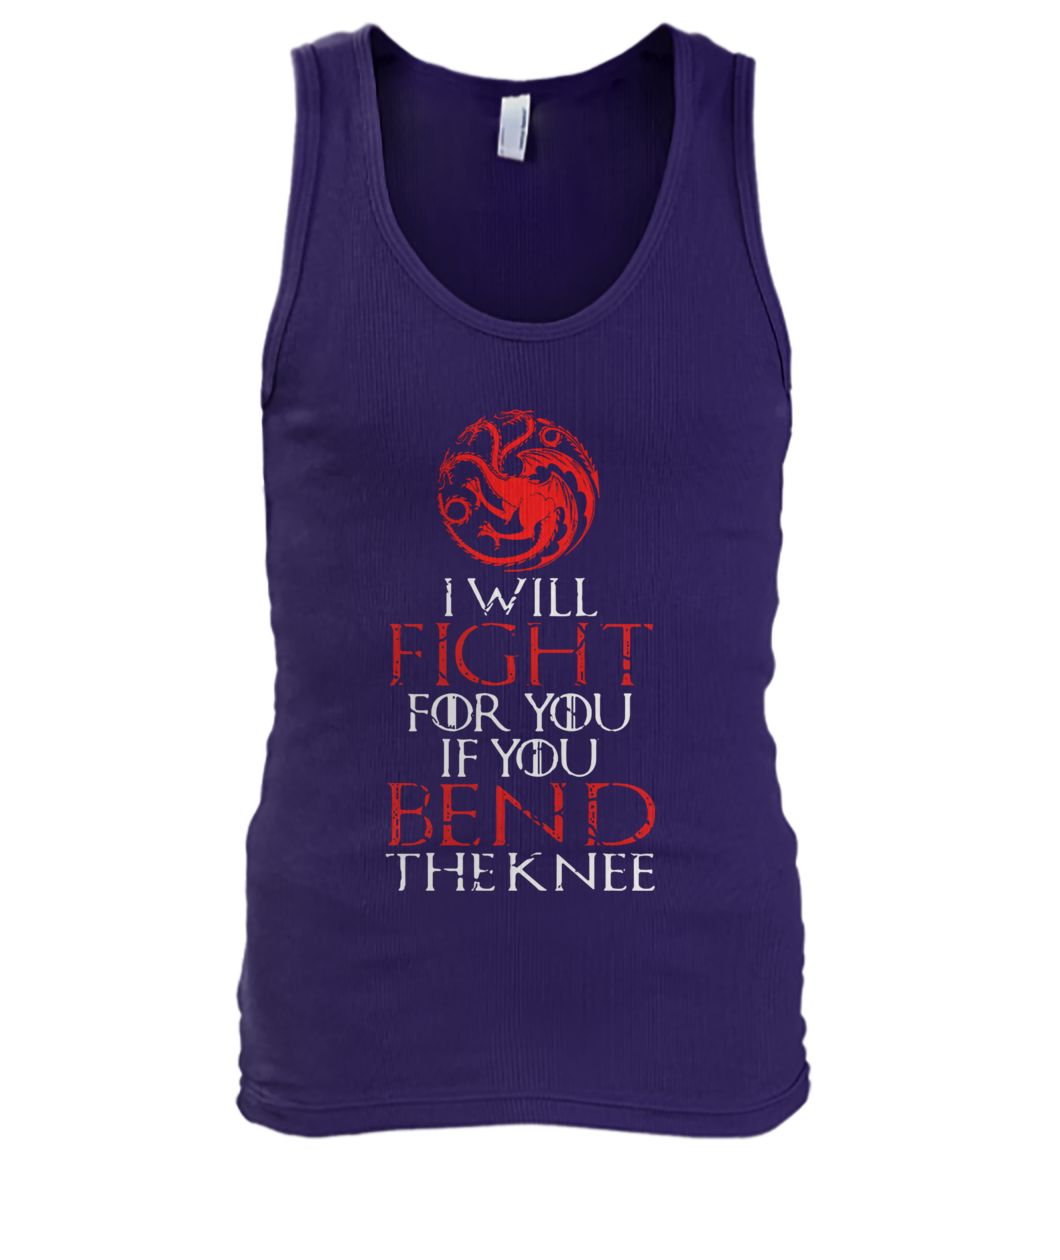 Game of thrones house targaryen I will fight for you if you bend the knee men's tank top